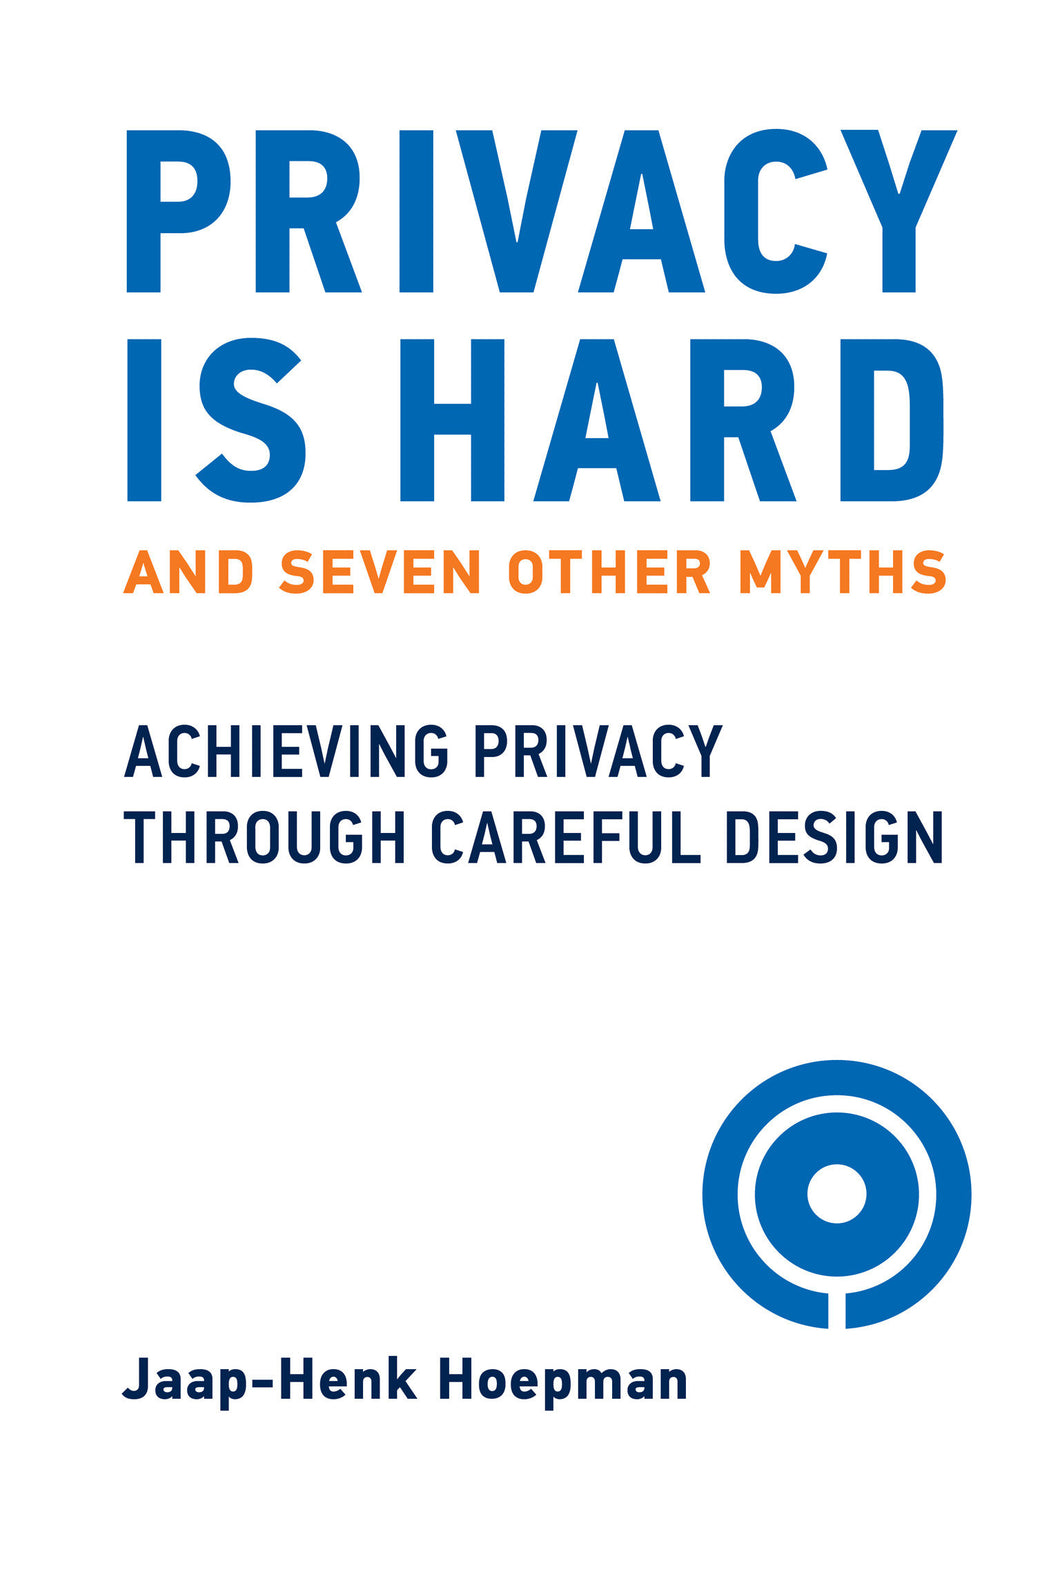 Privacy Is Hard and Seven Other Myths: Achieving Privacy through Careful Design